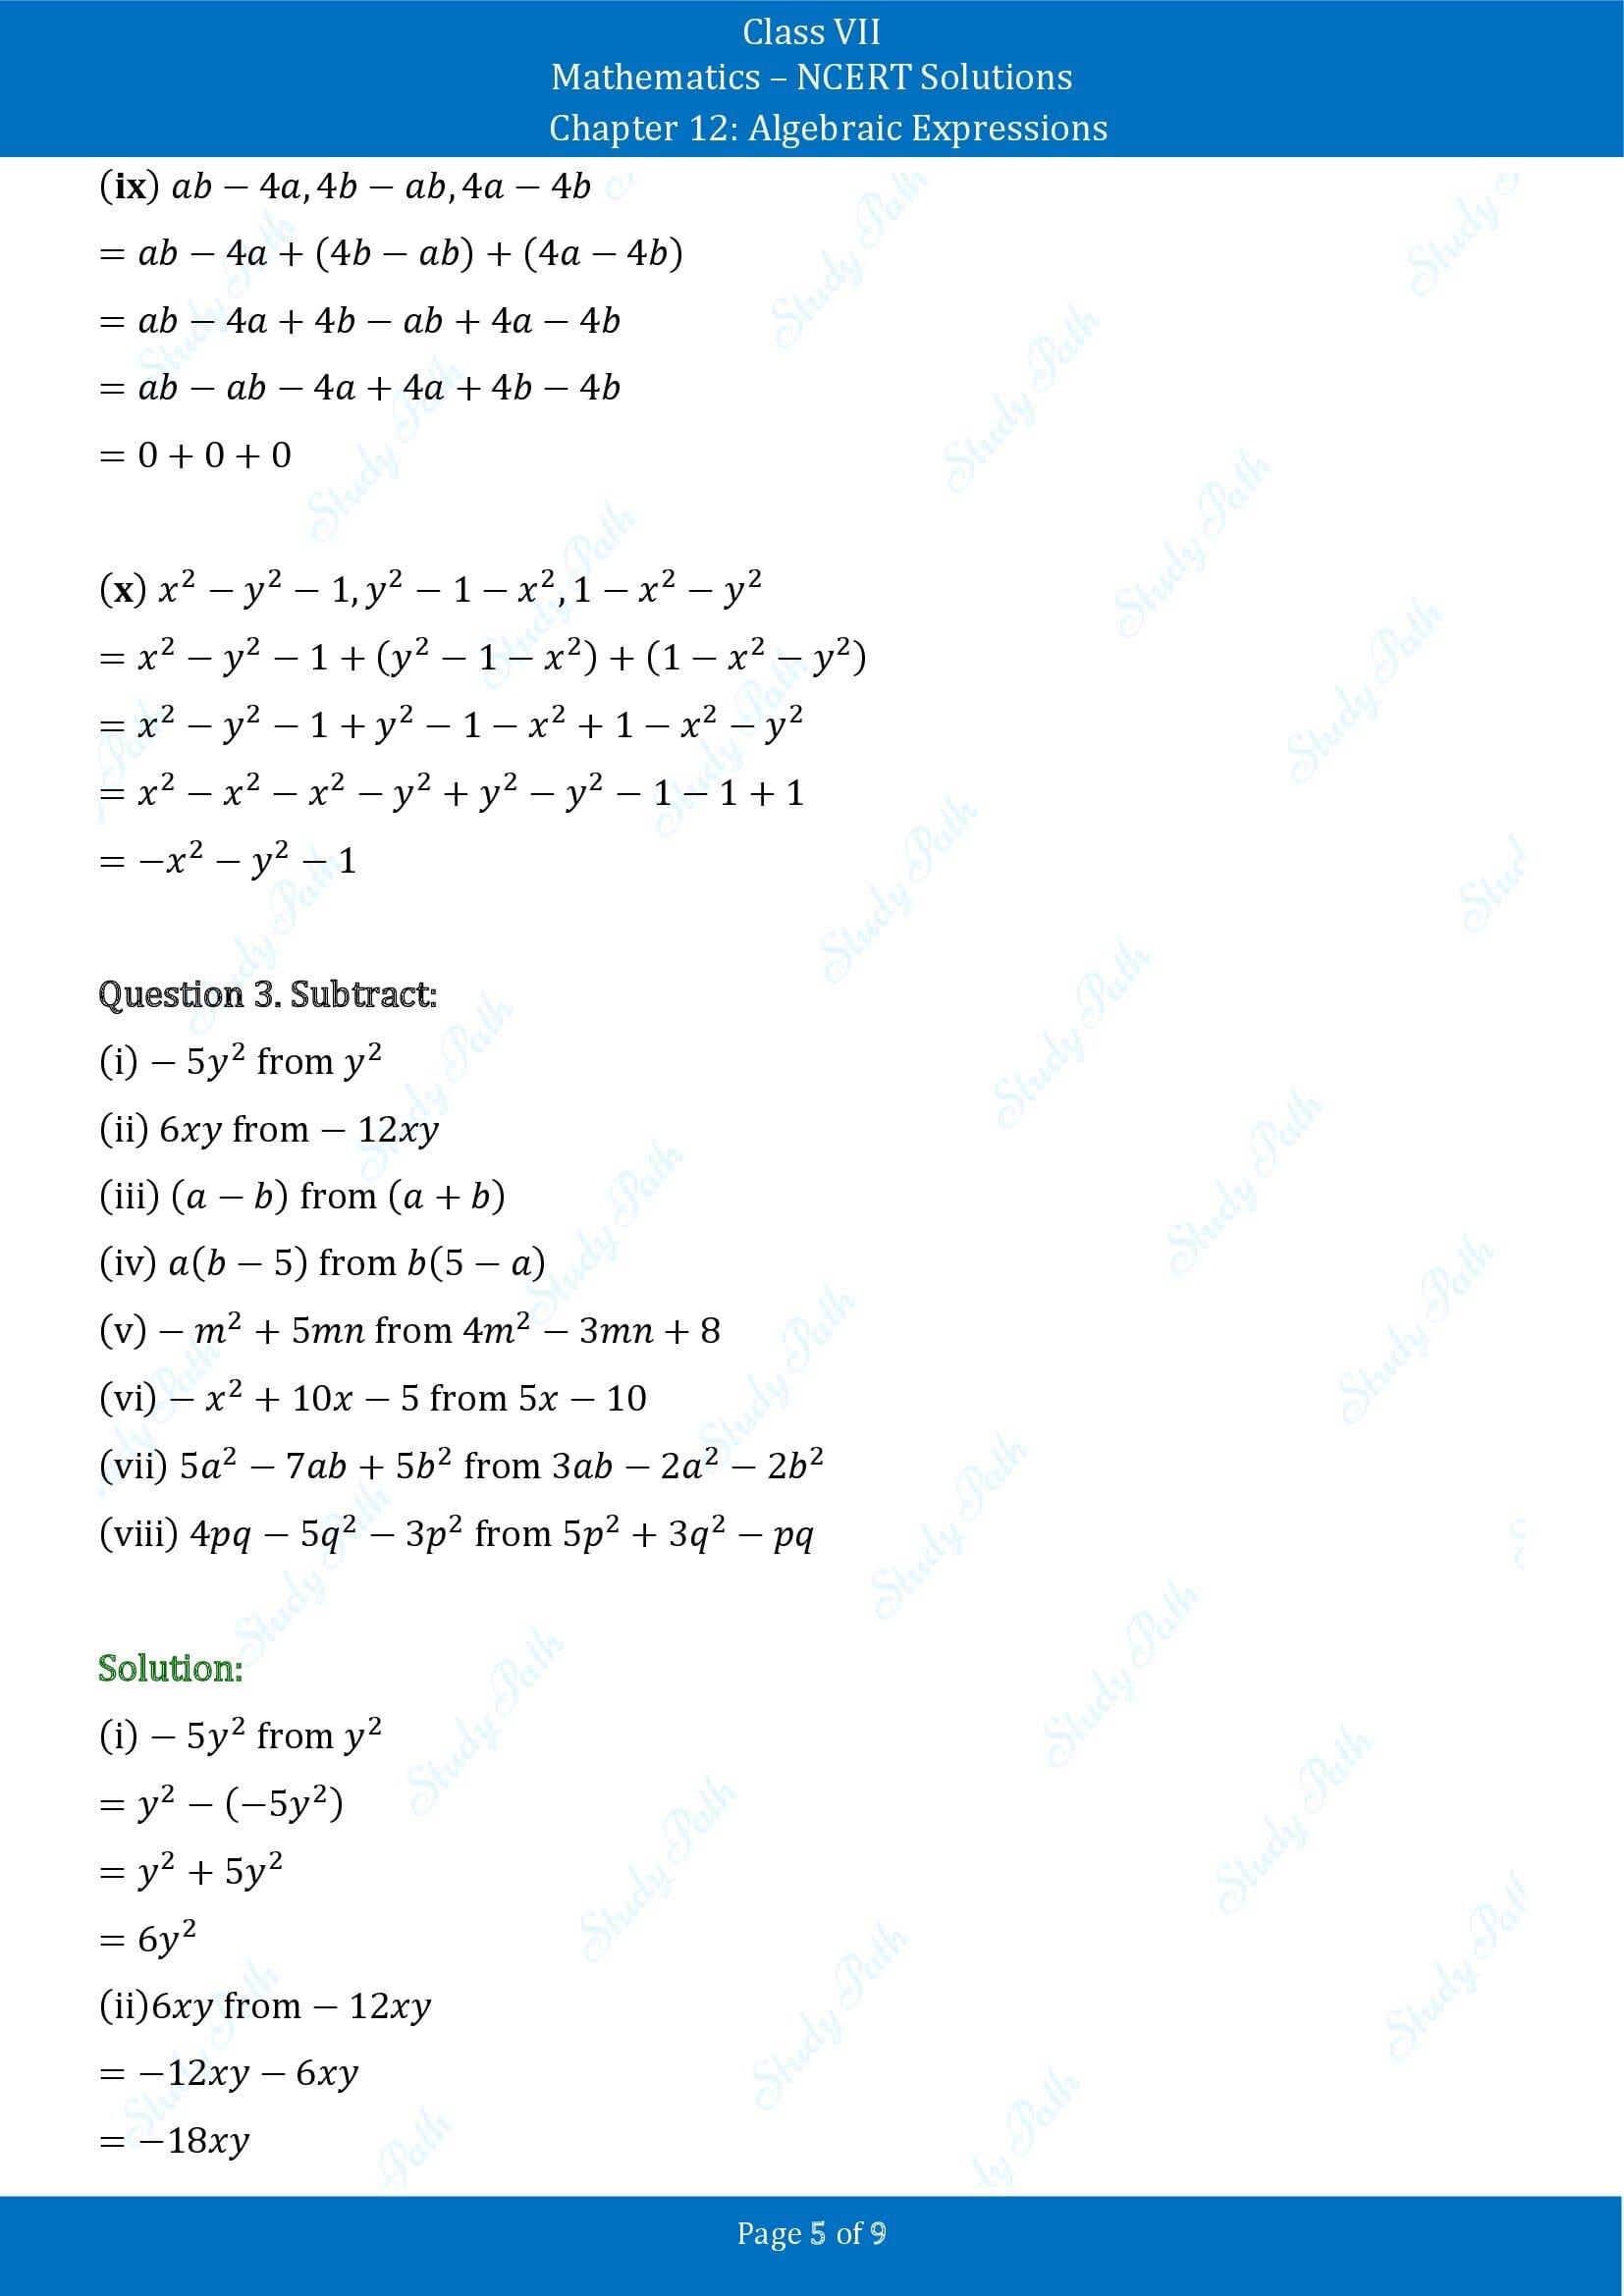 NCERT Solutions for Class 7 Maths Chapter 12 Algebraic Expressions Exercise 12.2 00005